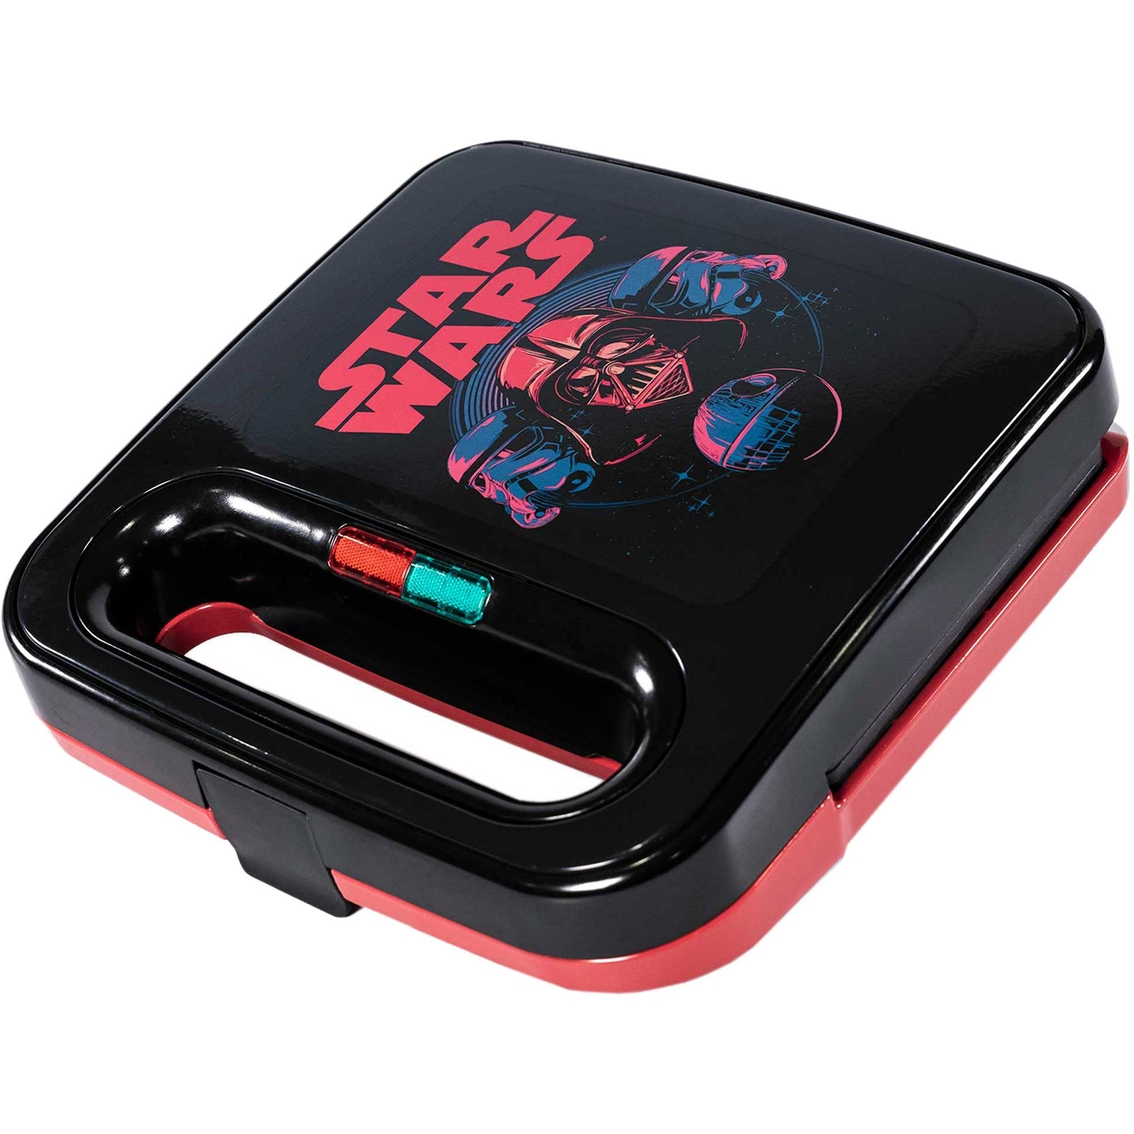 Star Wars Darth Vader and Stormtrooper Double Square Waffle Maker - Image 3 of 6